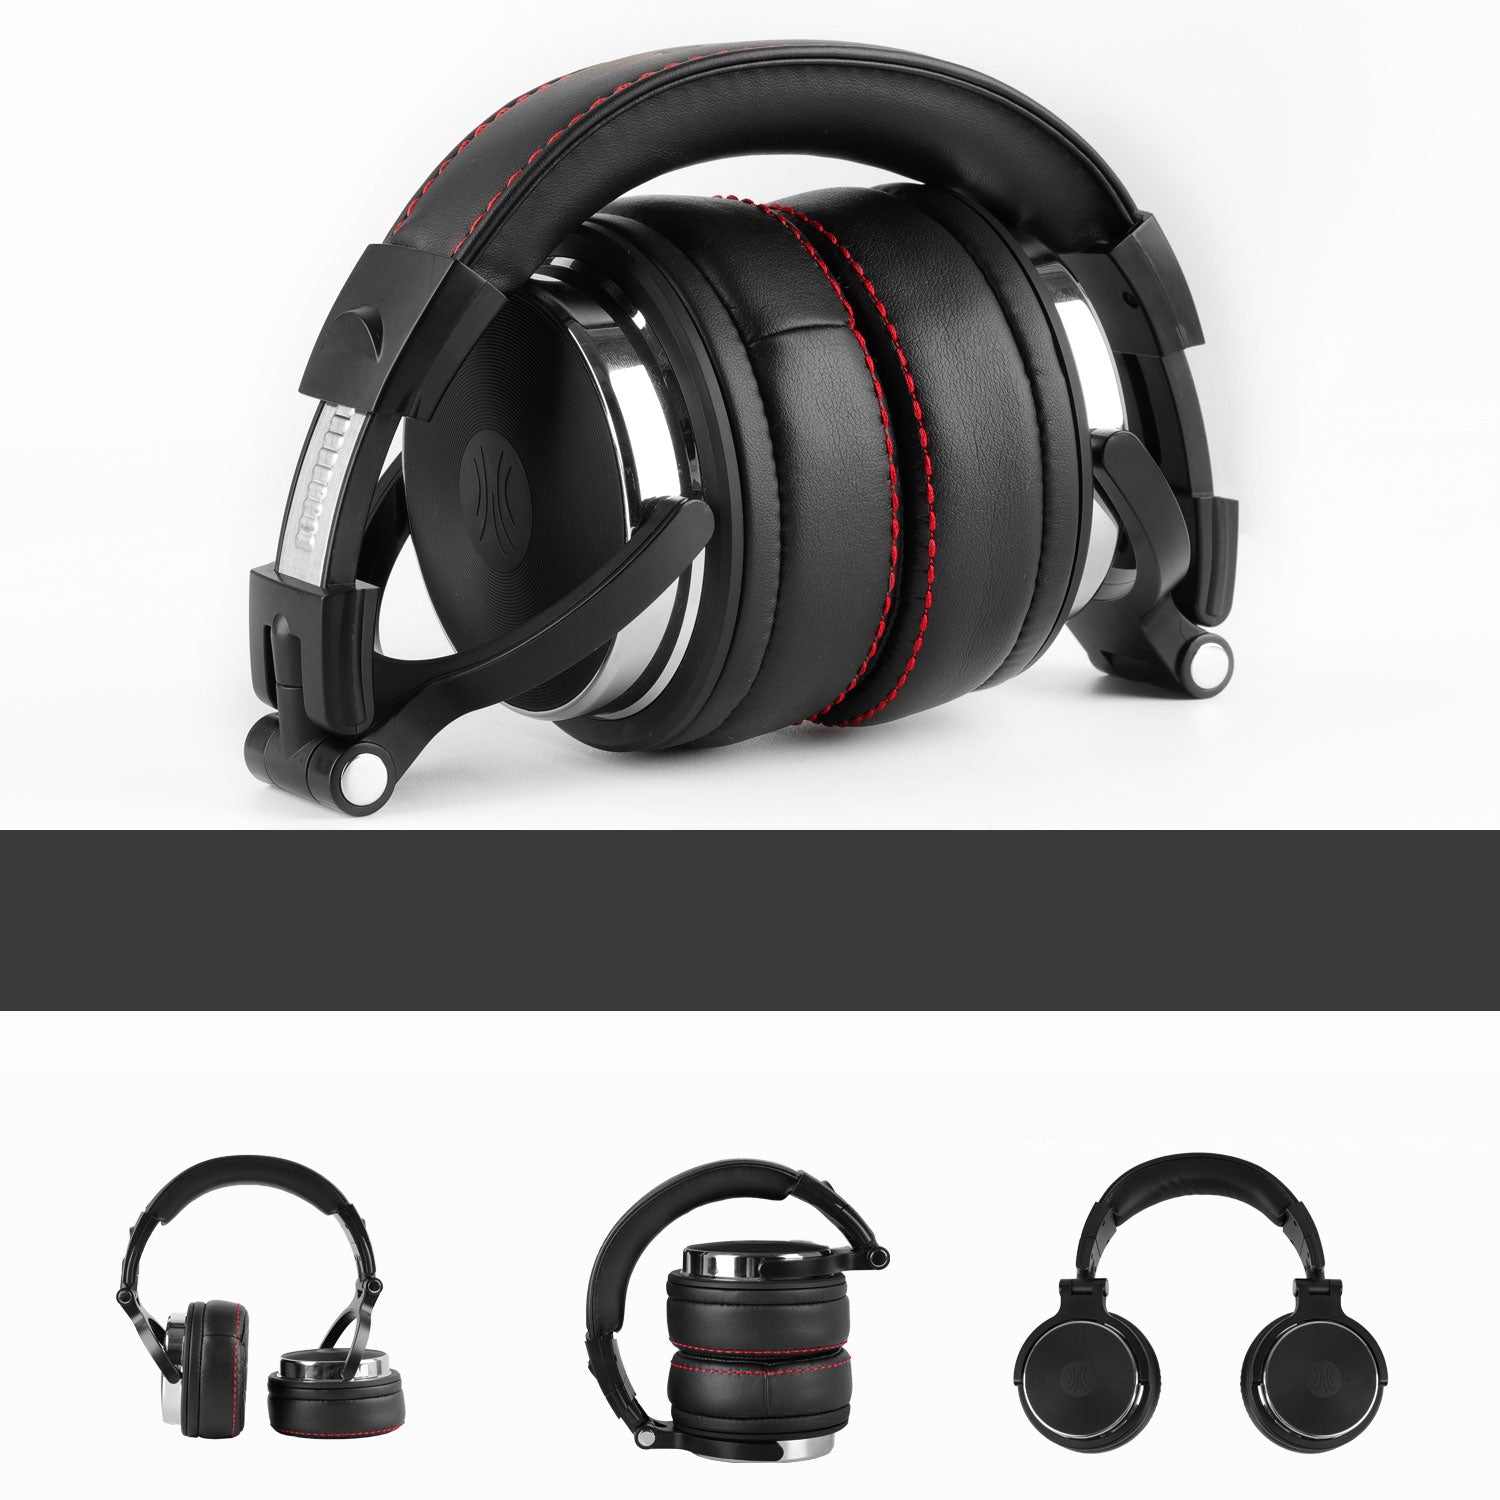 OneOdio Pro 50 Wired Headphones with Mic